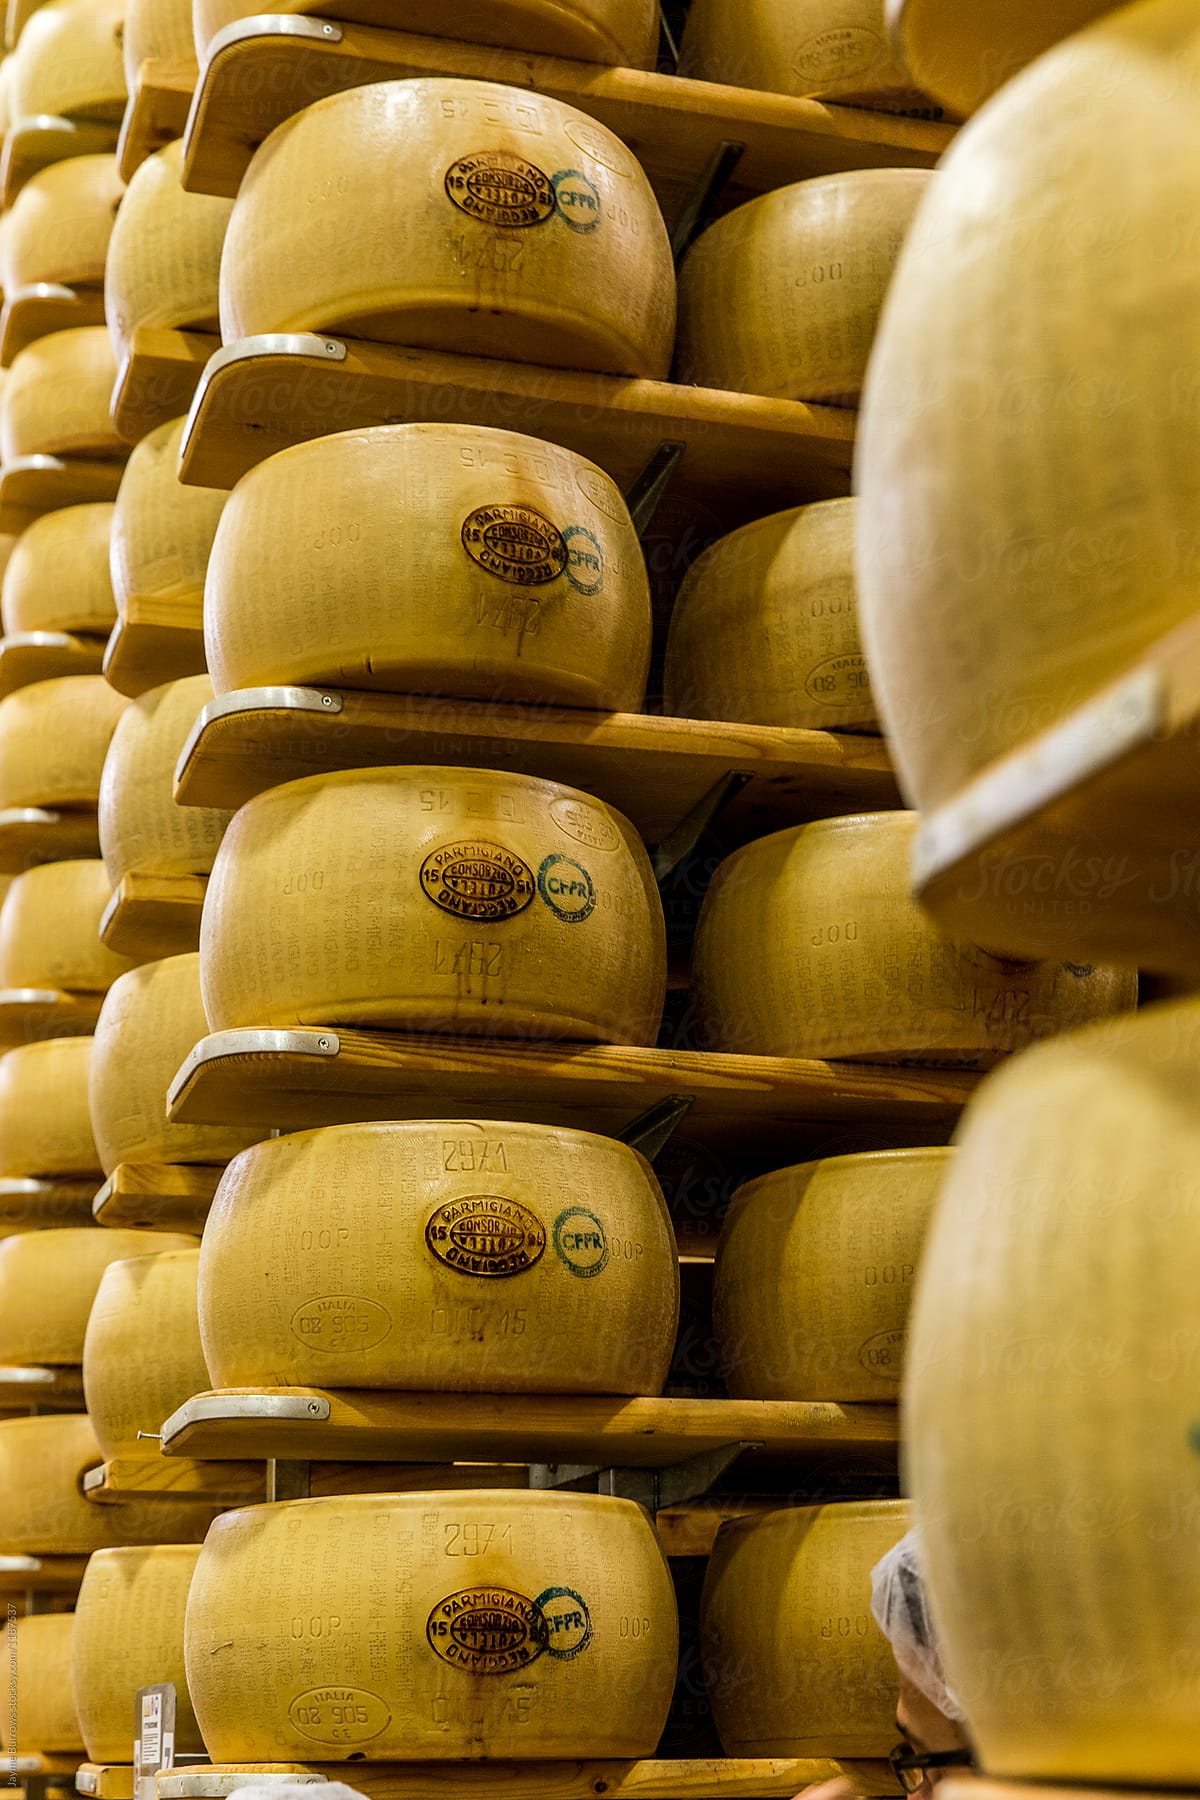 Many Wheels of Whole Parmesan Reggiano Cheese Stacked on Shelves